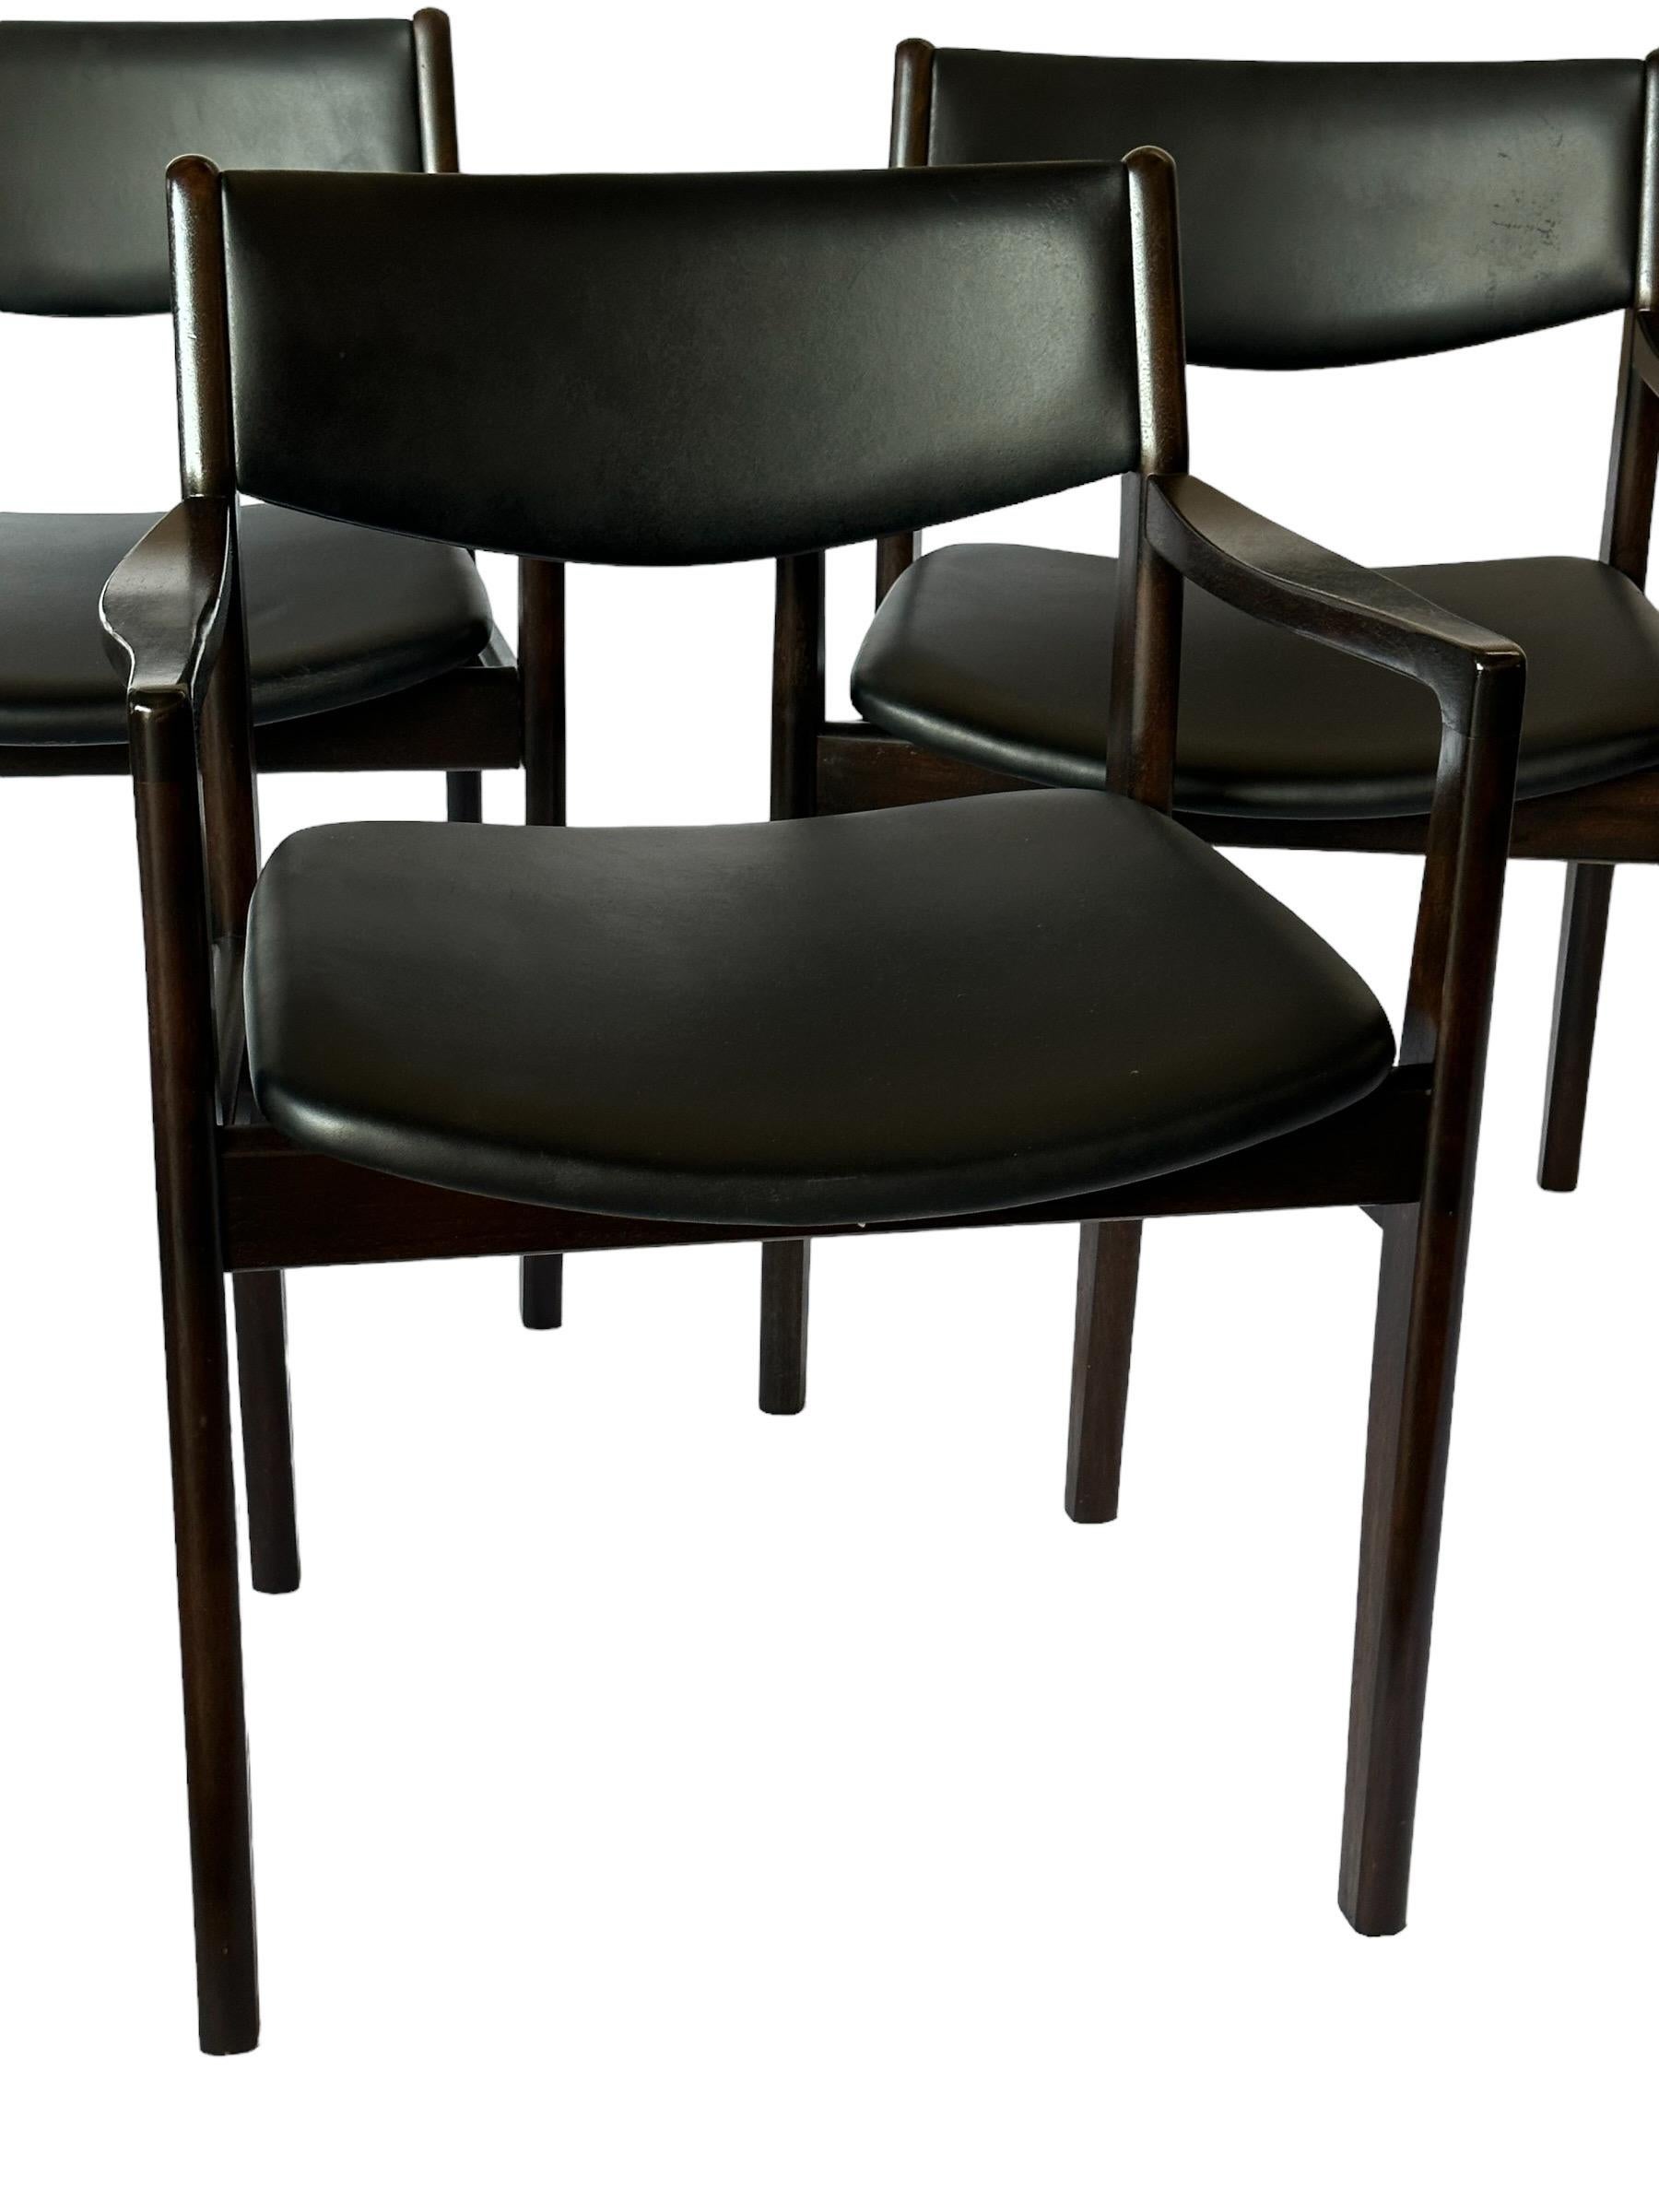 Set of 4 Midcentury Modern Danish Style Hardwood Dining Chairs For Sale 1